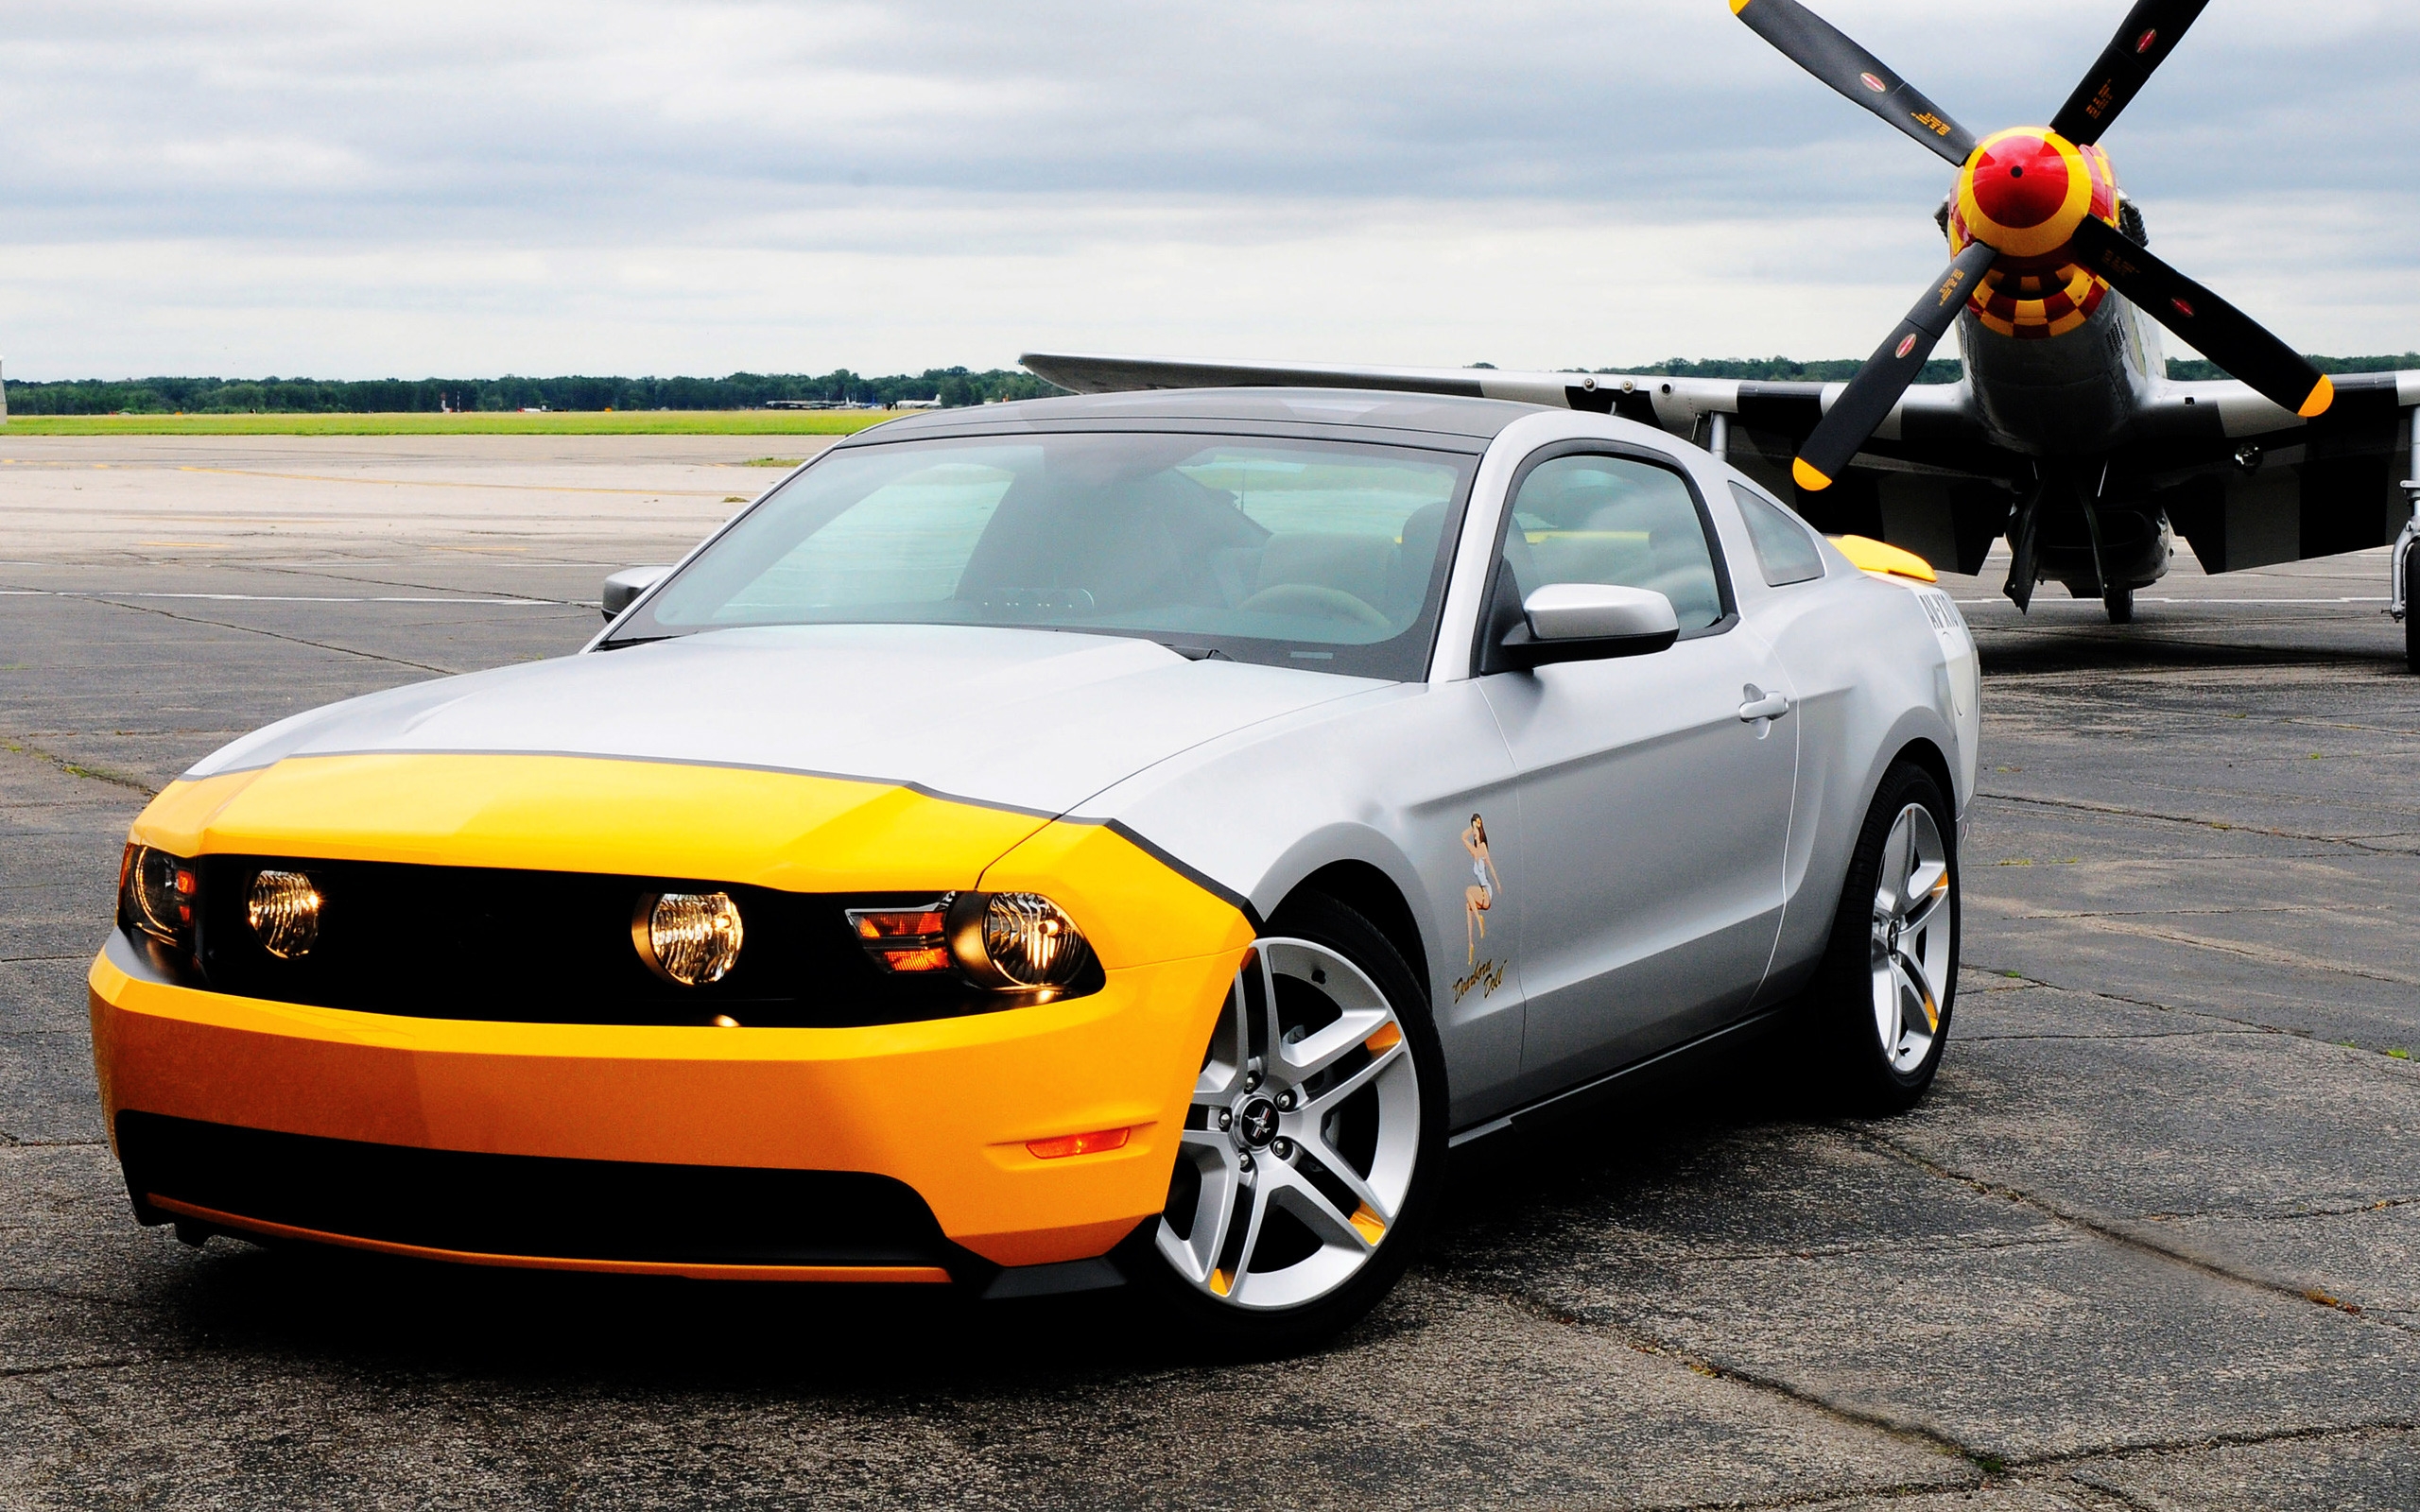 Ford Mustang Dearborn Doll for 2560 x 1600 widescreen resolution